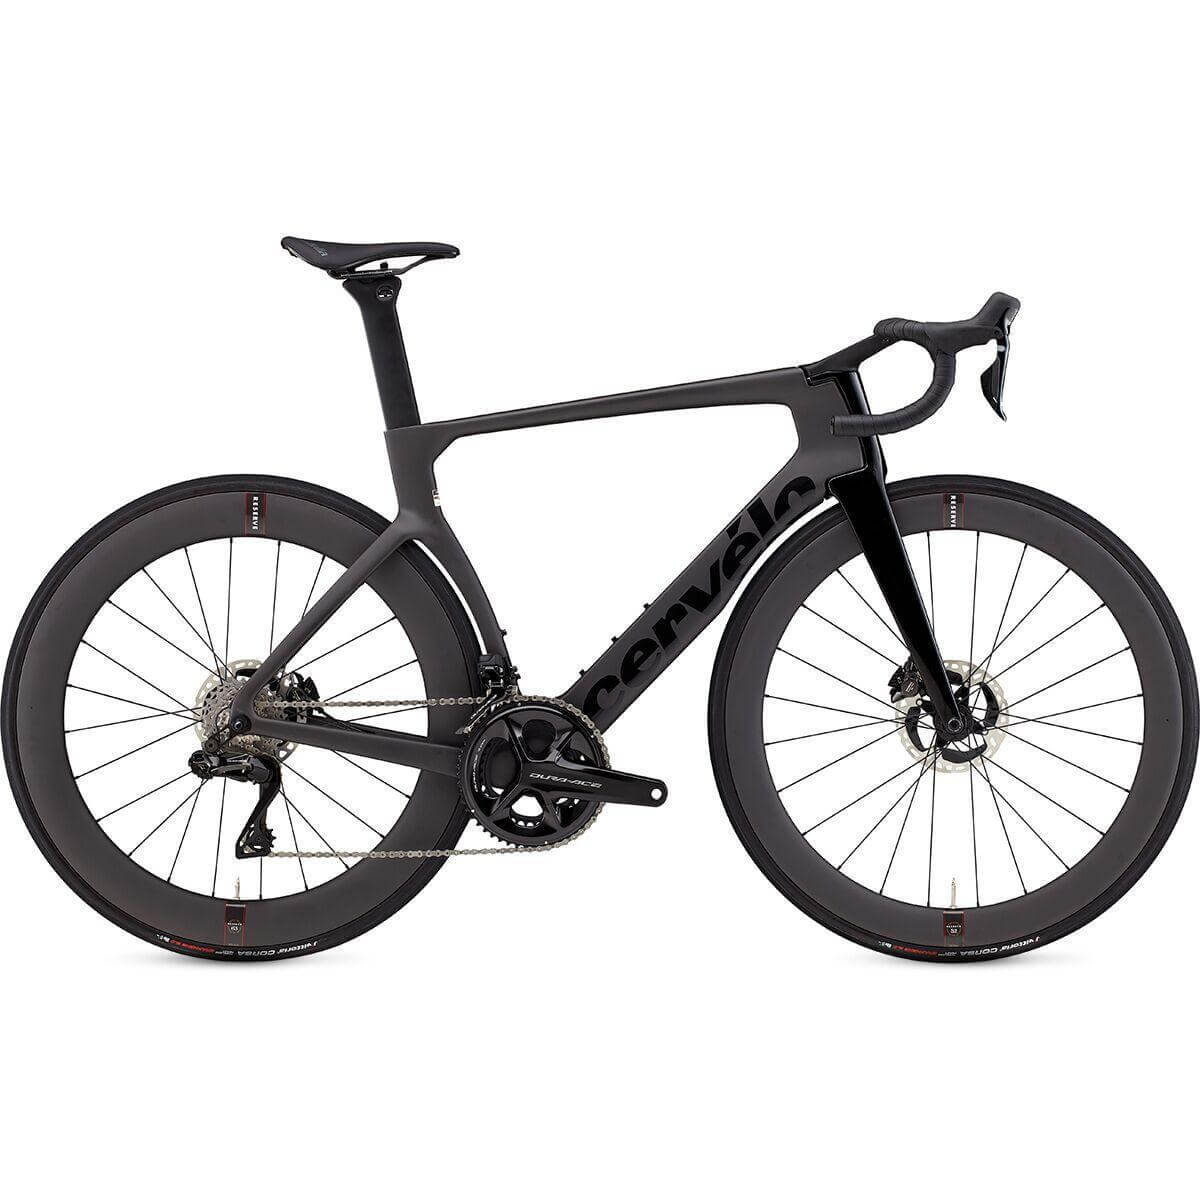 Cervelo S5 Dura-Ace Di2 | Strictly Bicycles